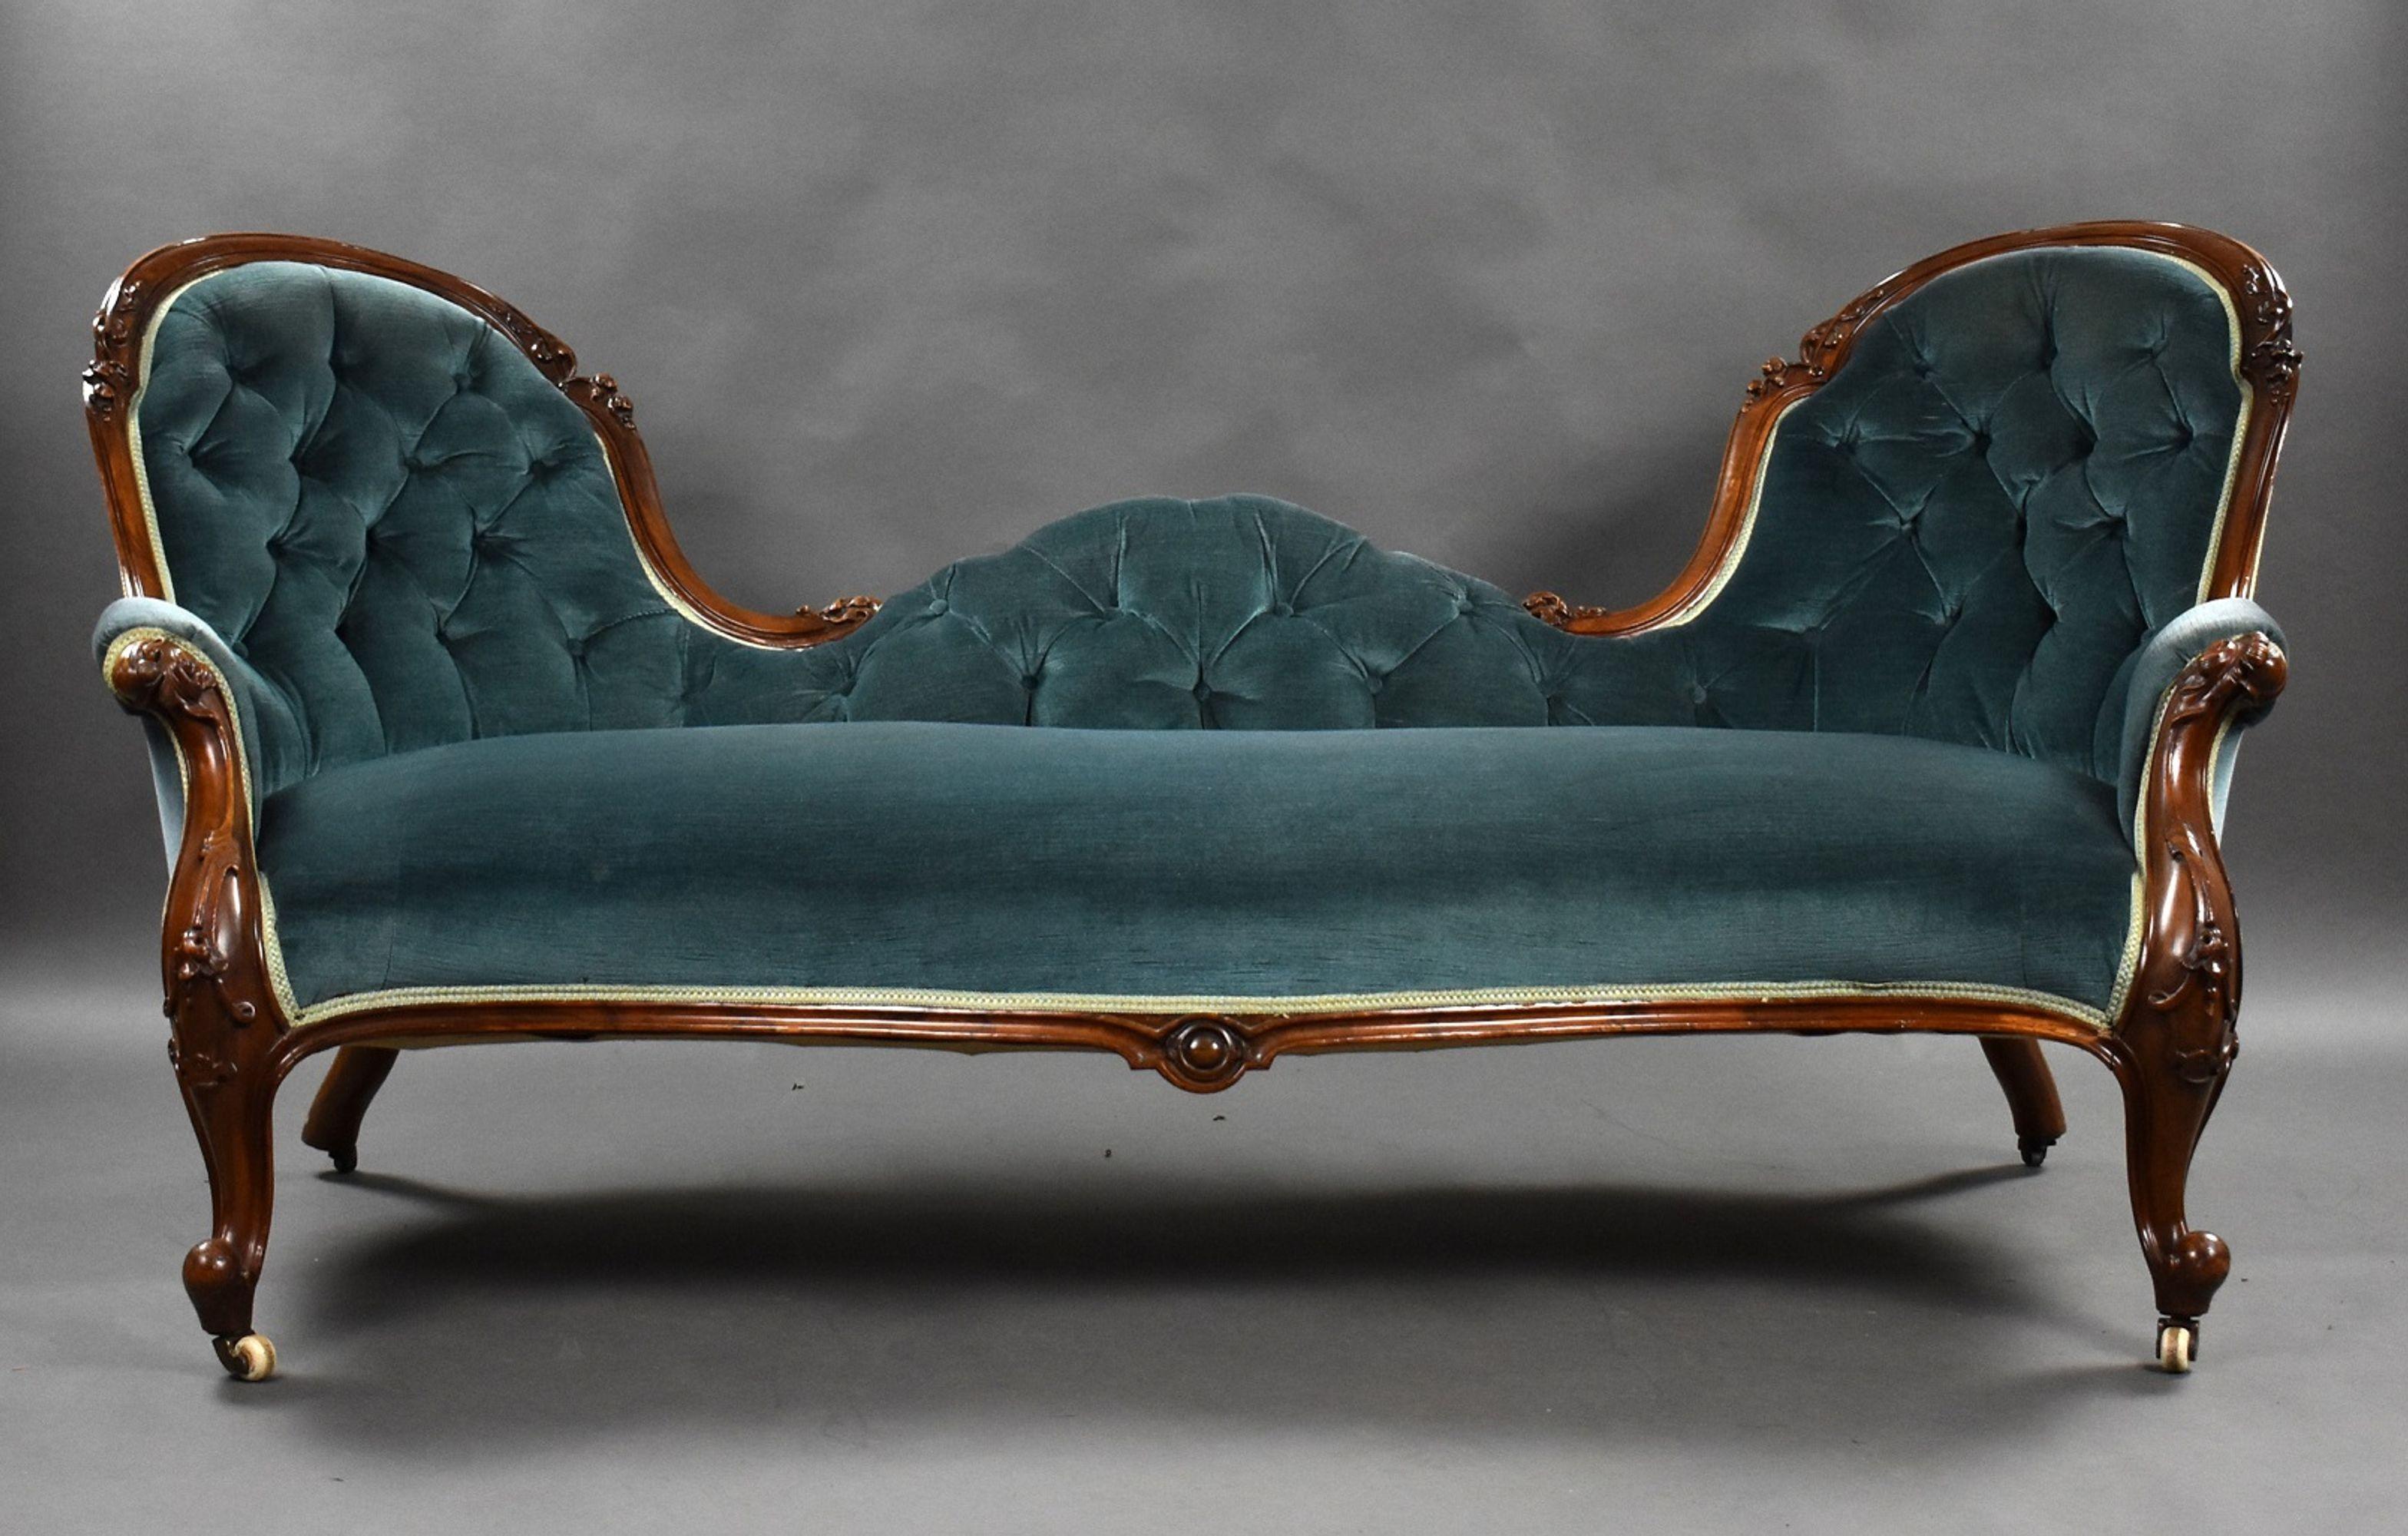 19th Century Victorian antique mahogany framed double ended chaise lounge in good condition upholstered in a Teal colour fabric with no rips or tears. The padded buttoned back with carved frame with serpentine seat raised on carved cabriole legs